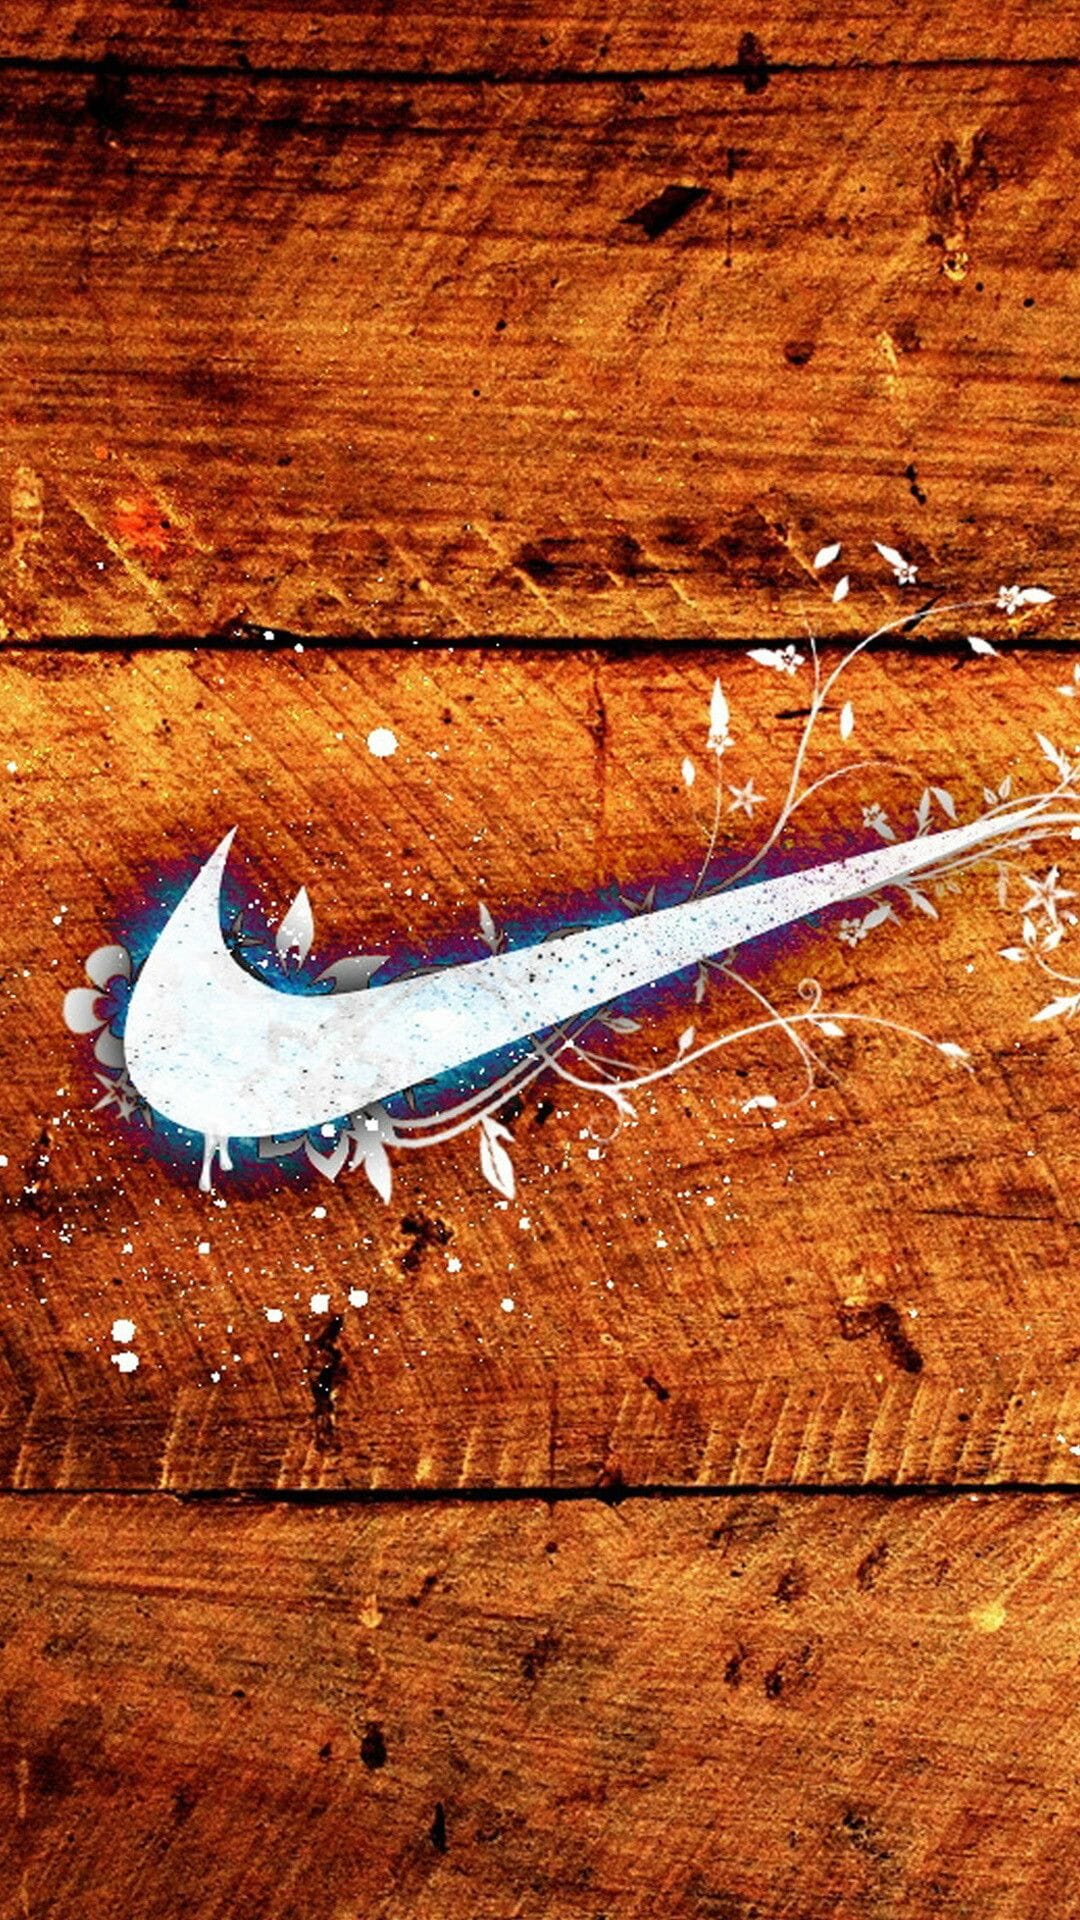 Nike Wallpaper for iPhone, iPhone, Desktop HD Background / Wallpaper (1080p, 4k) HD Wallpaper (Desktop Background / Android / iPhone) (1080p, 4k) (1080x1920) (2022)